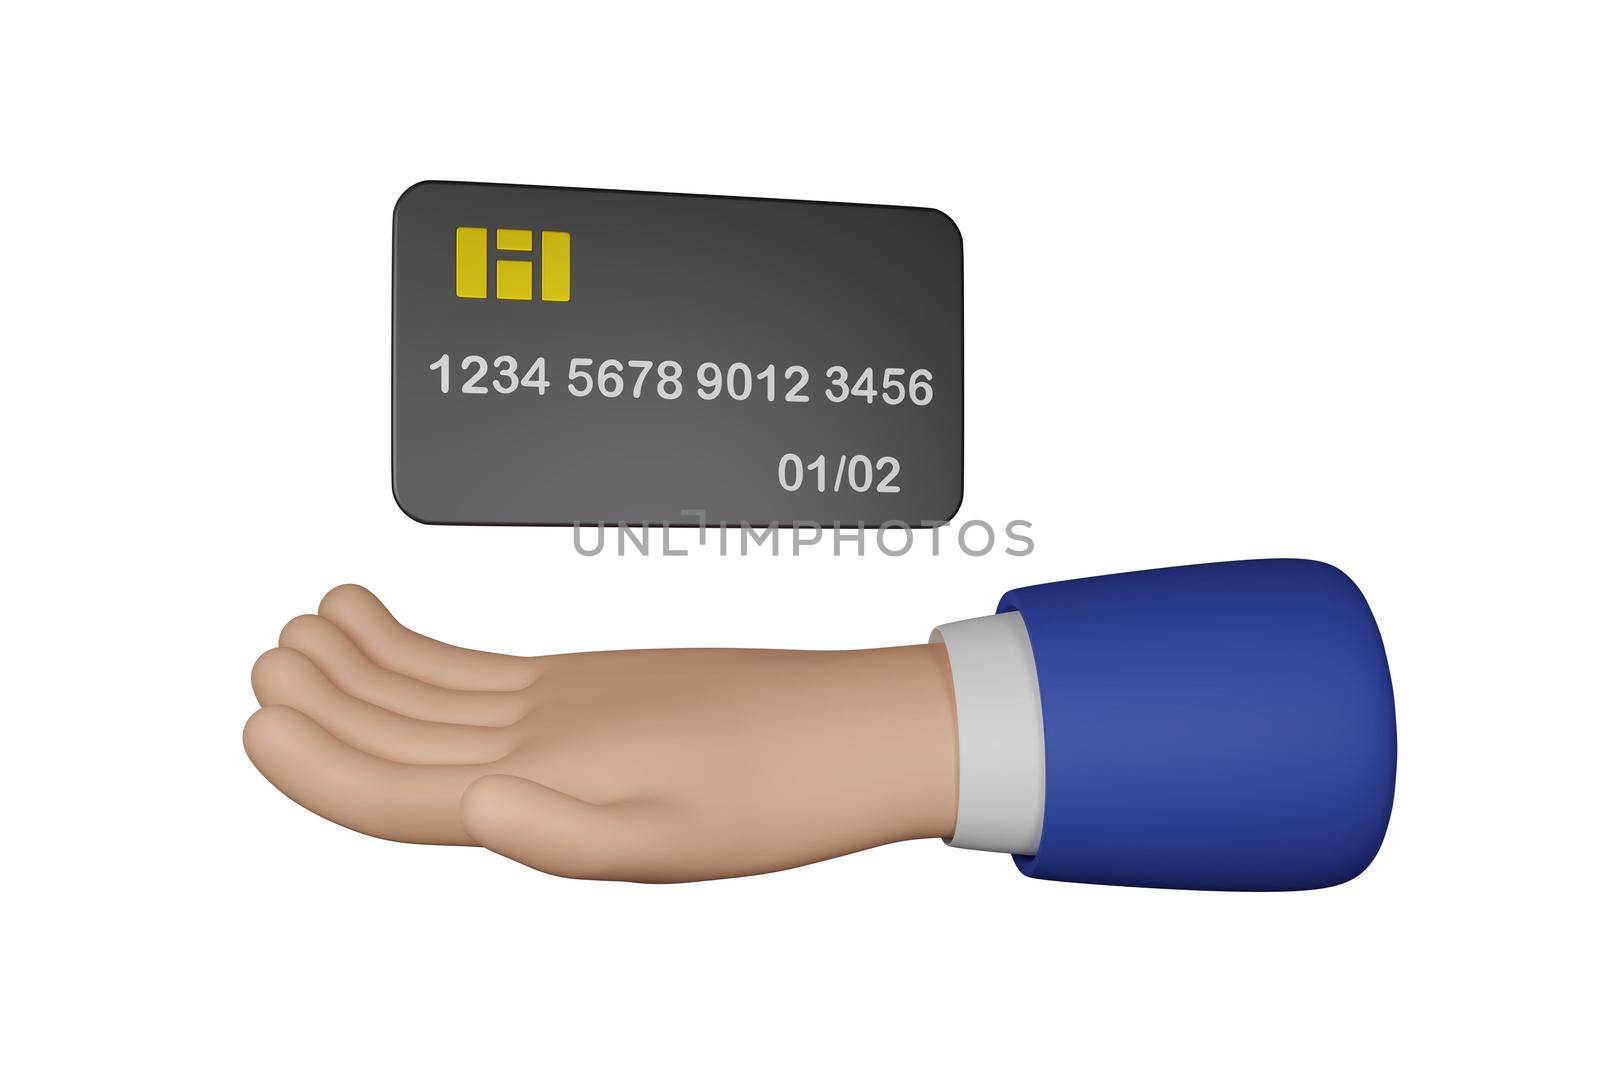 3D Cartoon businessman character hand holds a credit card isolated on white background. Hand gesture friendly funny style. 3d rendering by Melnyk